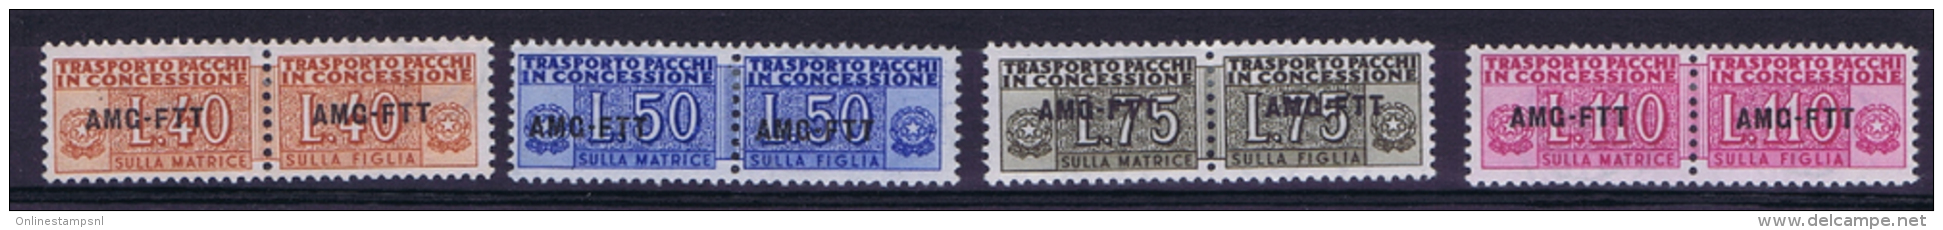 Italie Trieste Zone A AMG-FTT  Pacchi In Concessionne 1 - 4   MH/* , - Mint/hinged